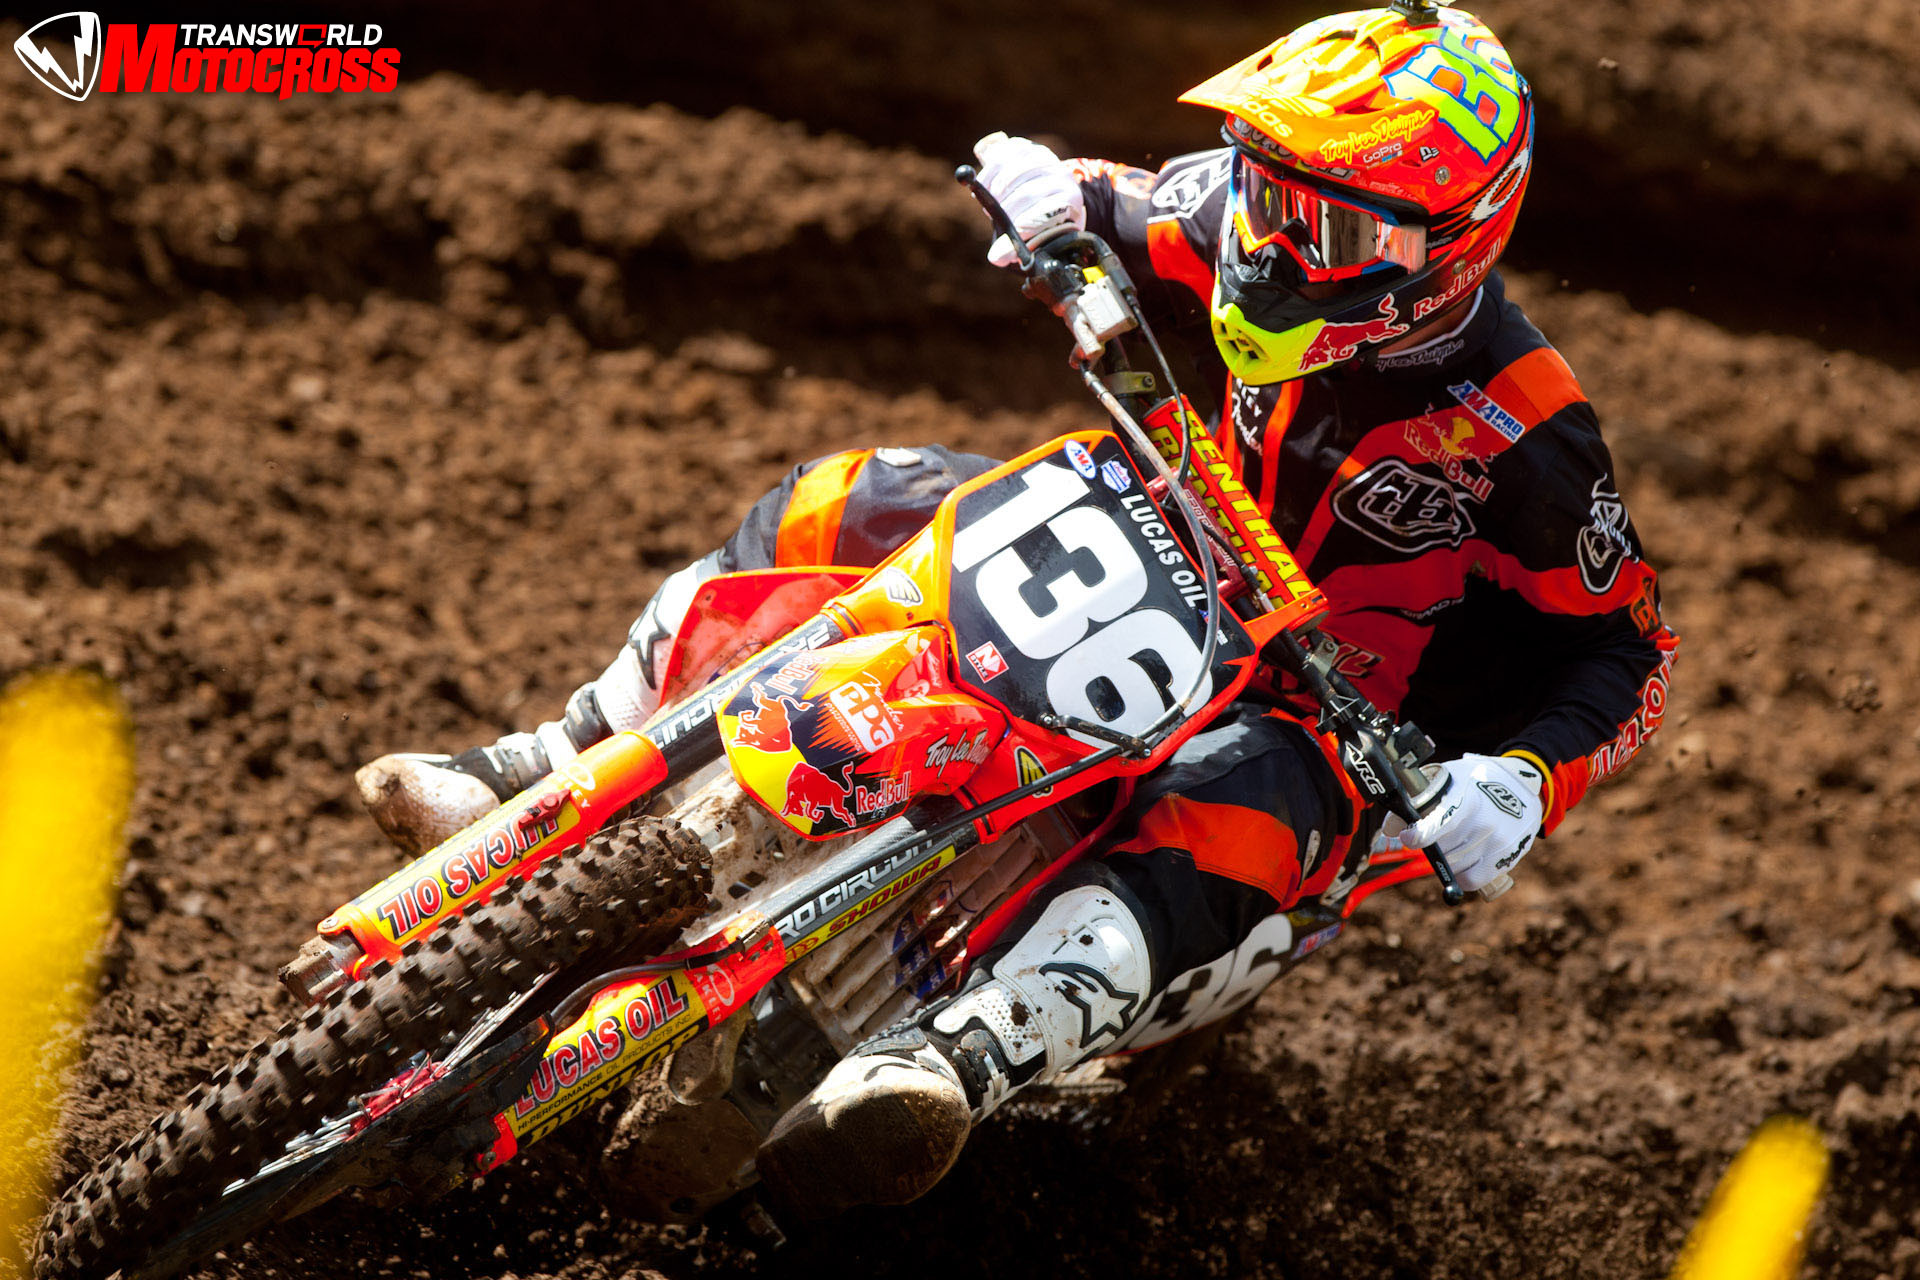 1920x1280 Weekly Wallpapers - Washougal 2012 | Transworld Motocross